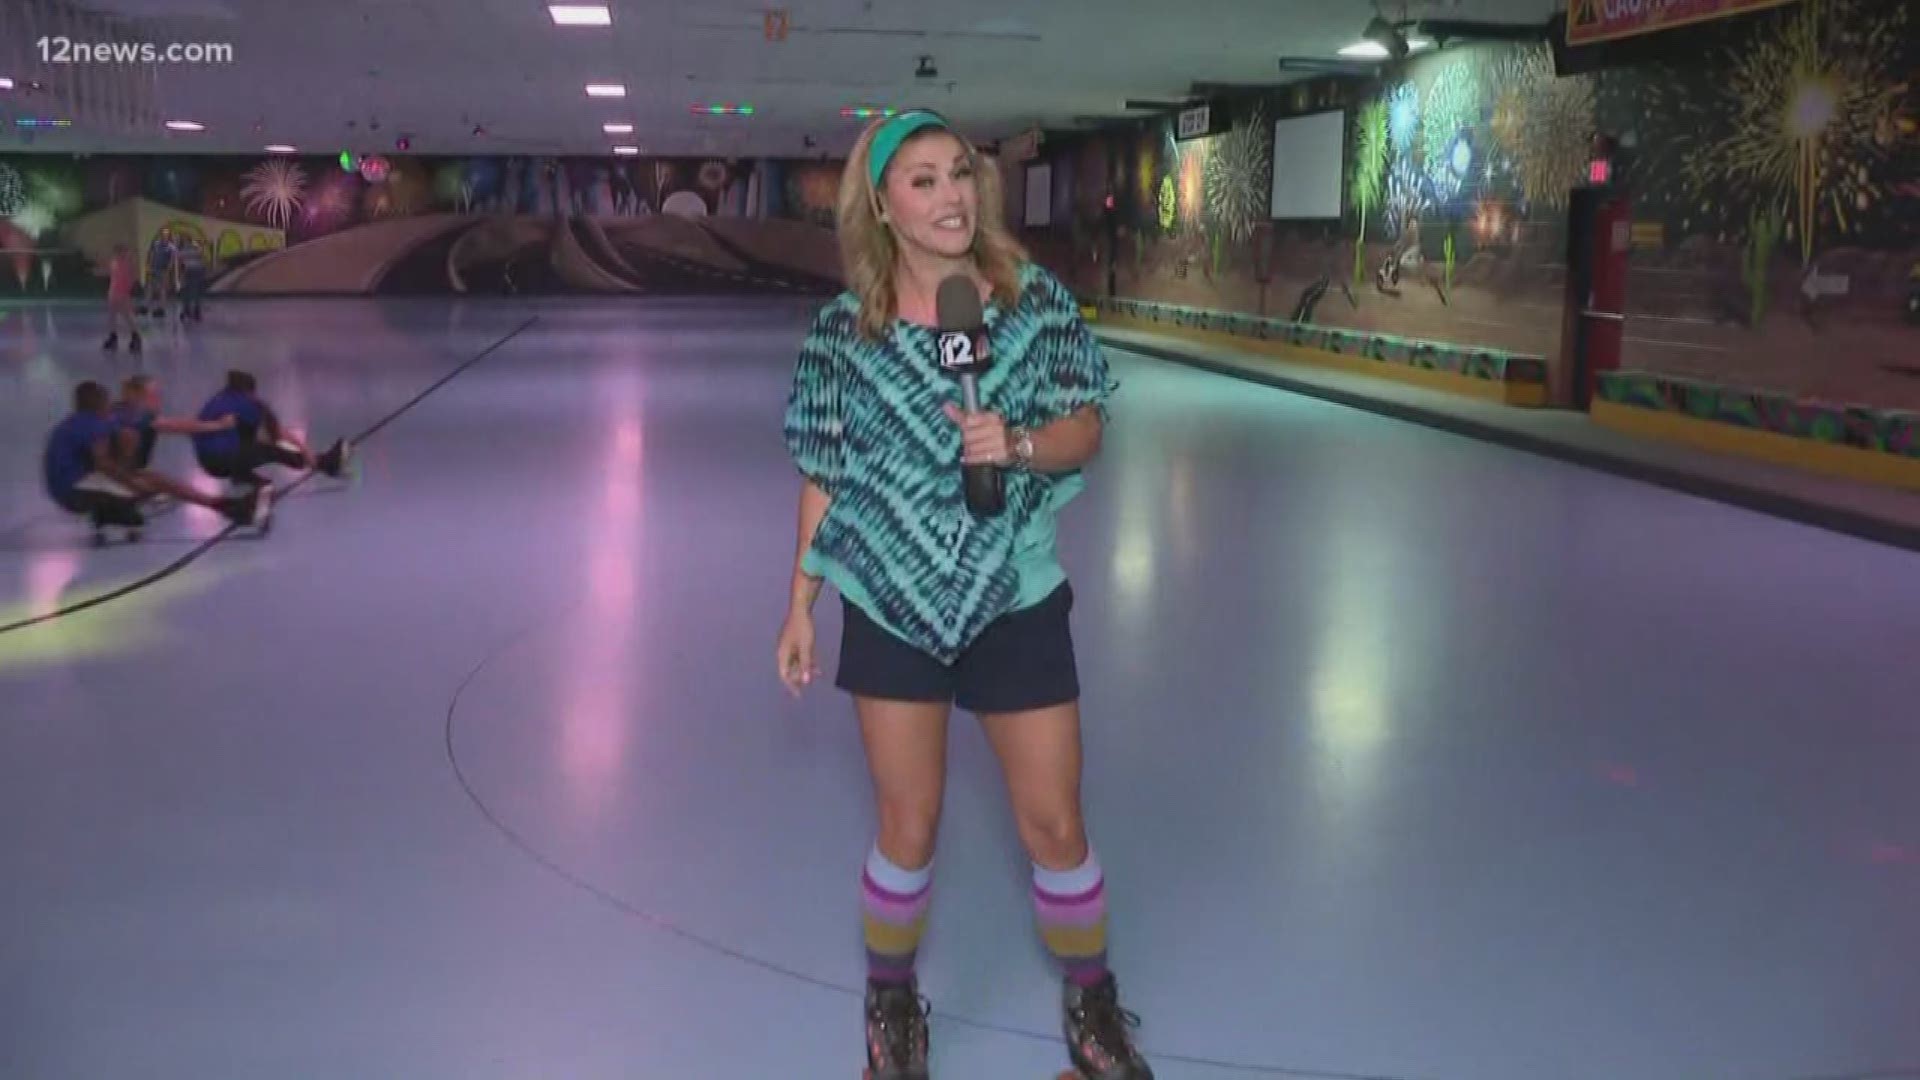 Rachel Cole gives us the details on the summer offerings at Skateland in Mesa.